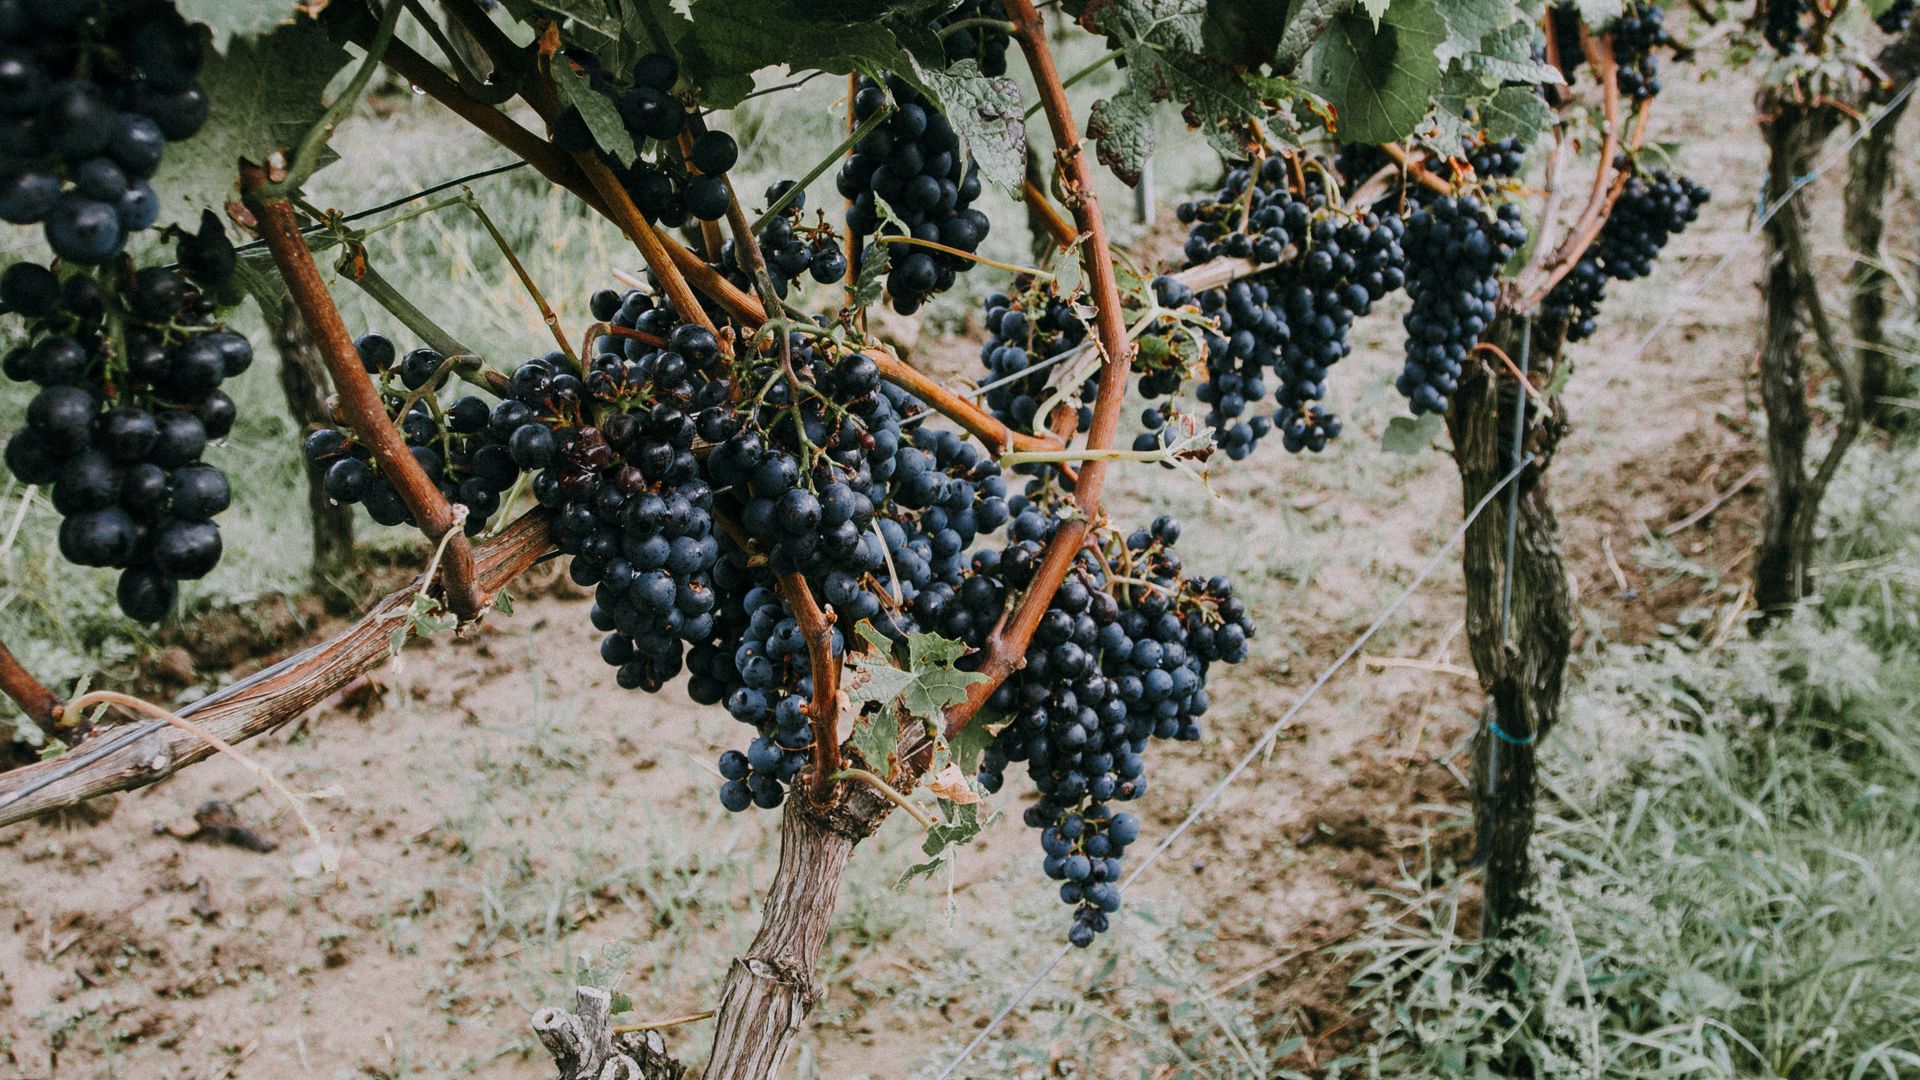 Download wallpaper 1920x1080 grapevine, grapes, berries full hd, hdtv, fhd, 1080p HD background